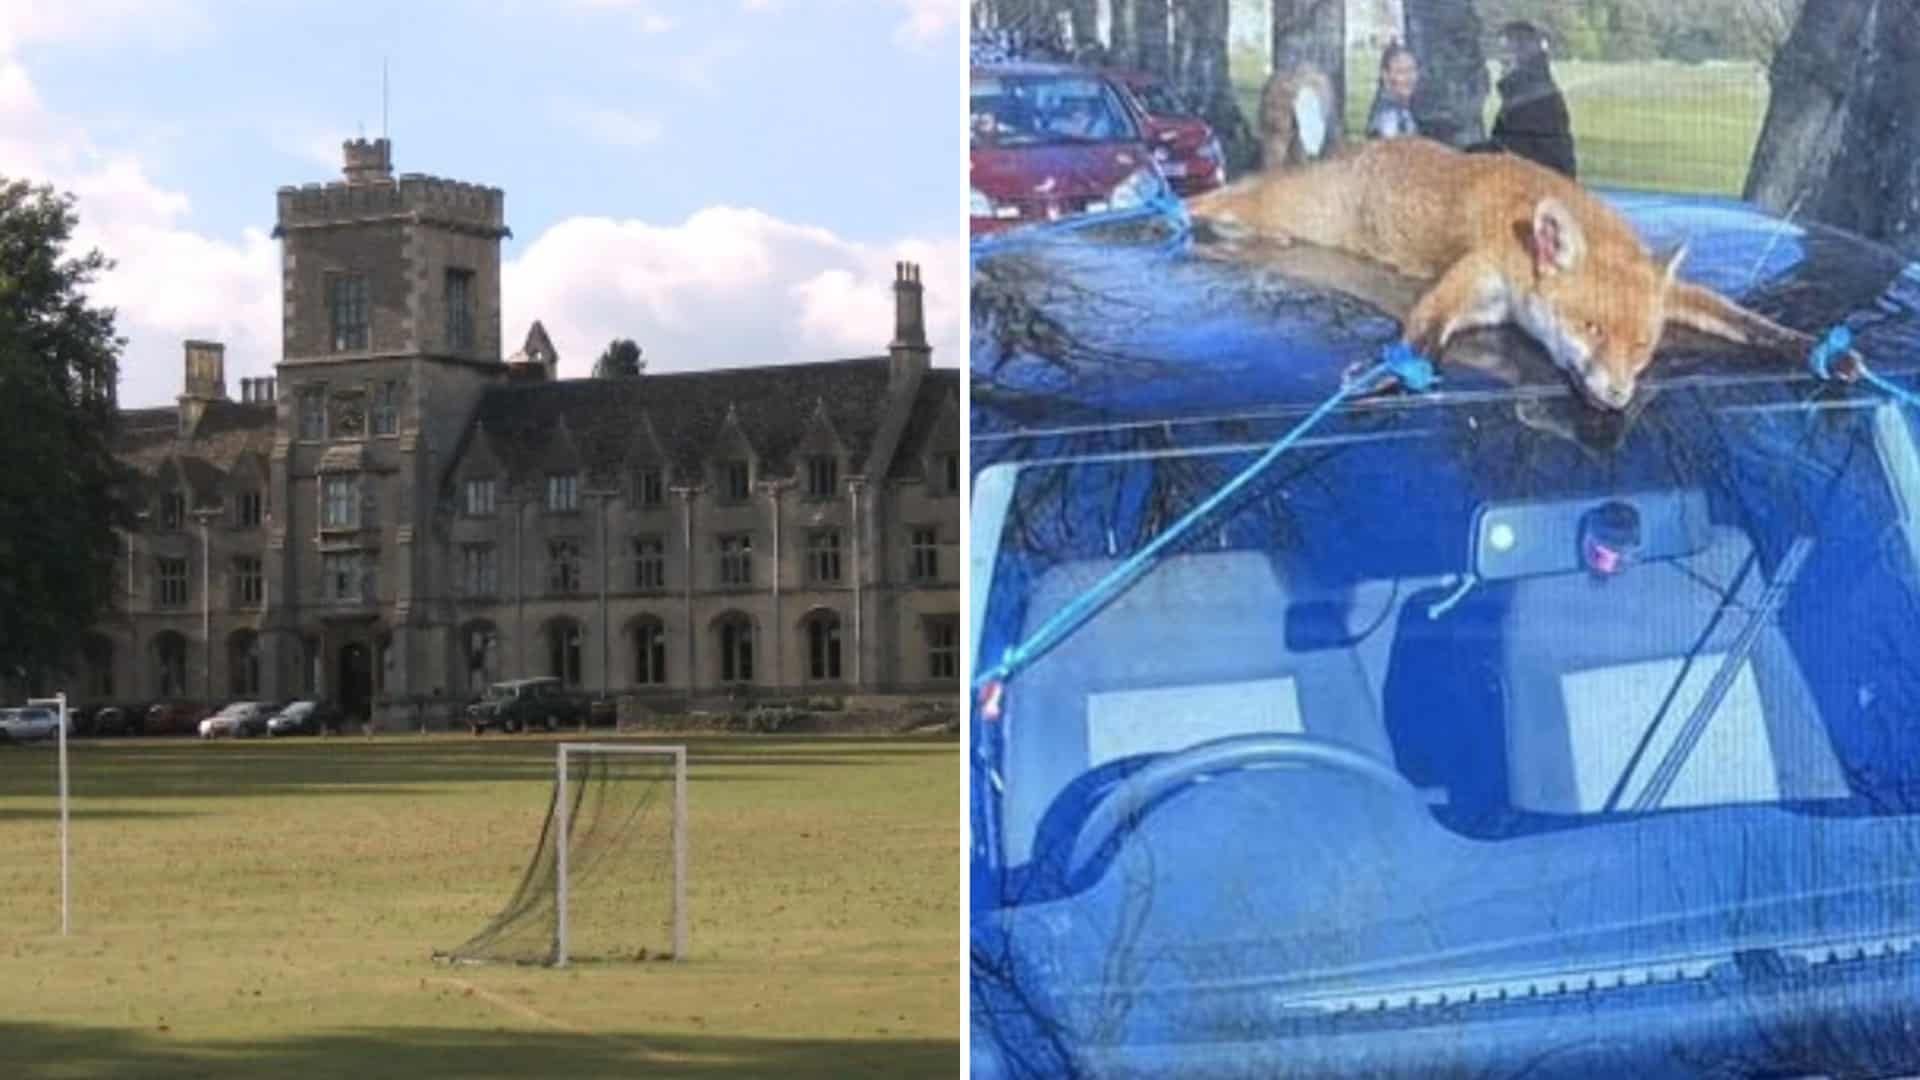 Agriculture students strap dead fox to car roof in sick stunt at charity rally